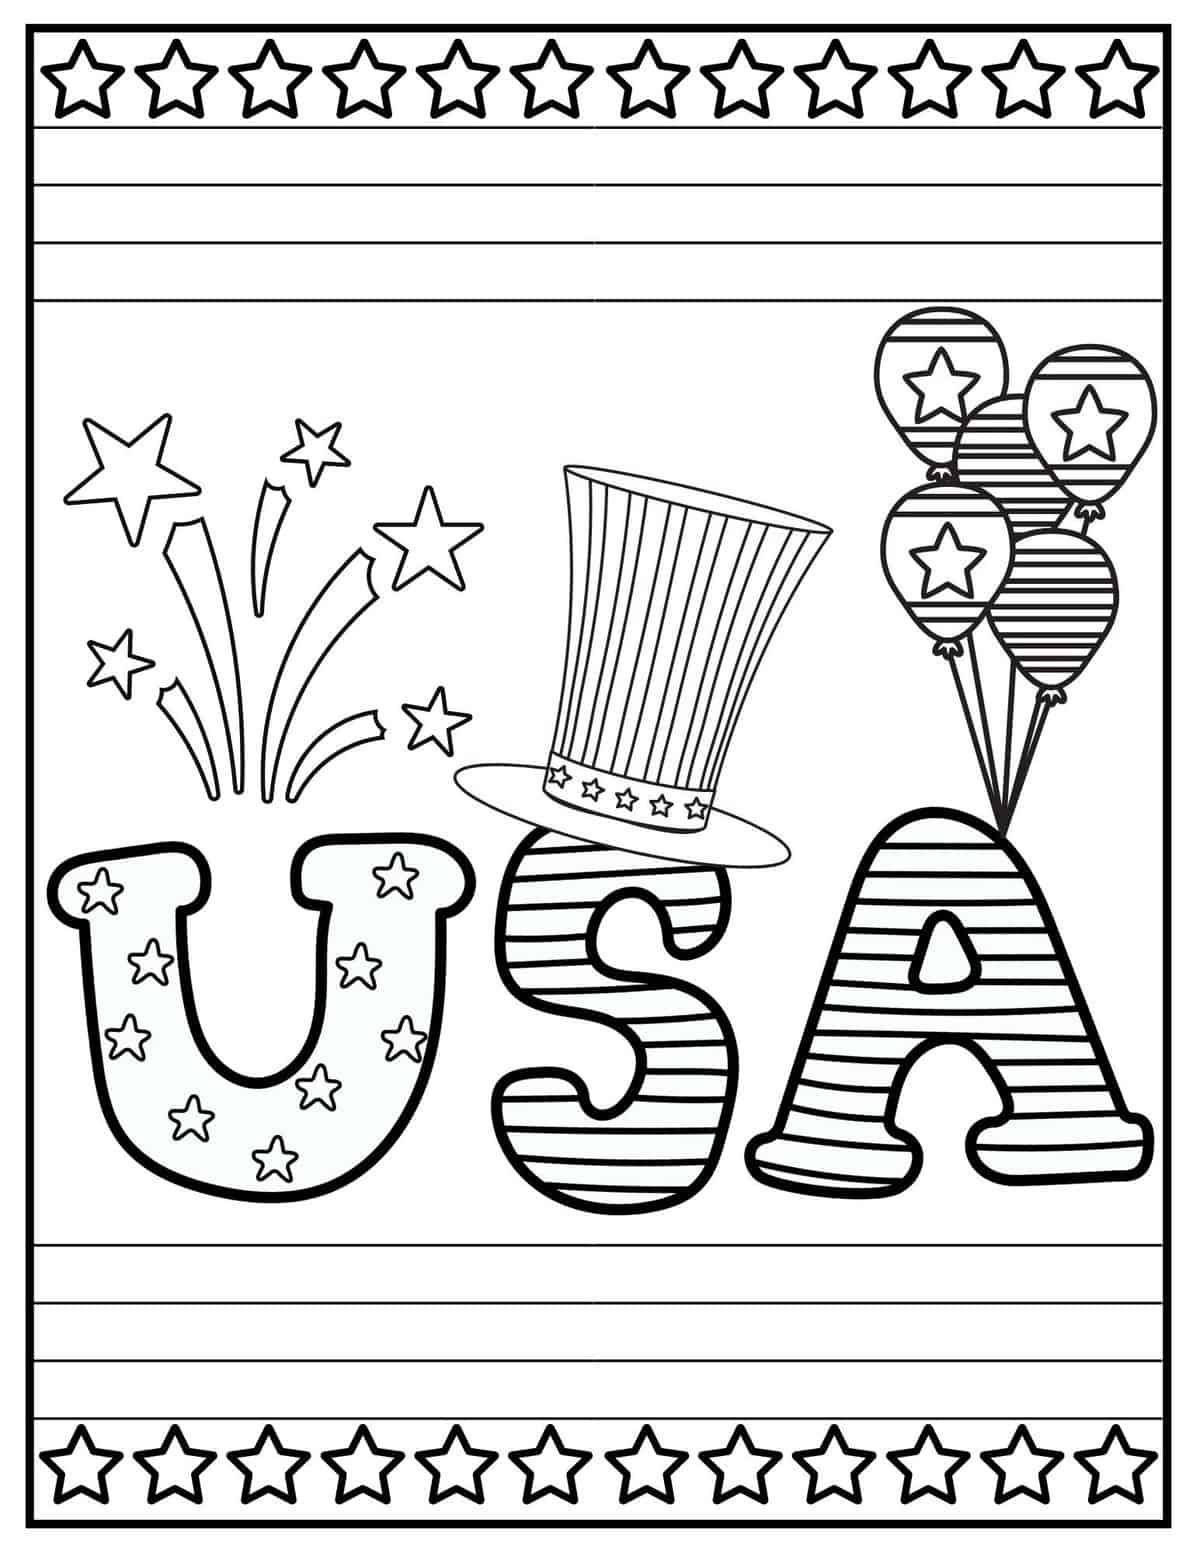 USA coloring page